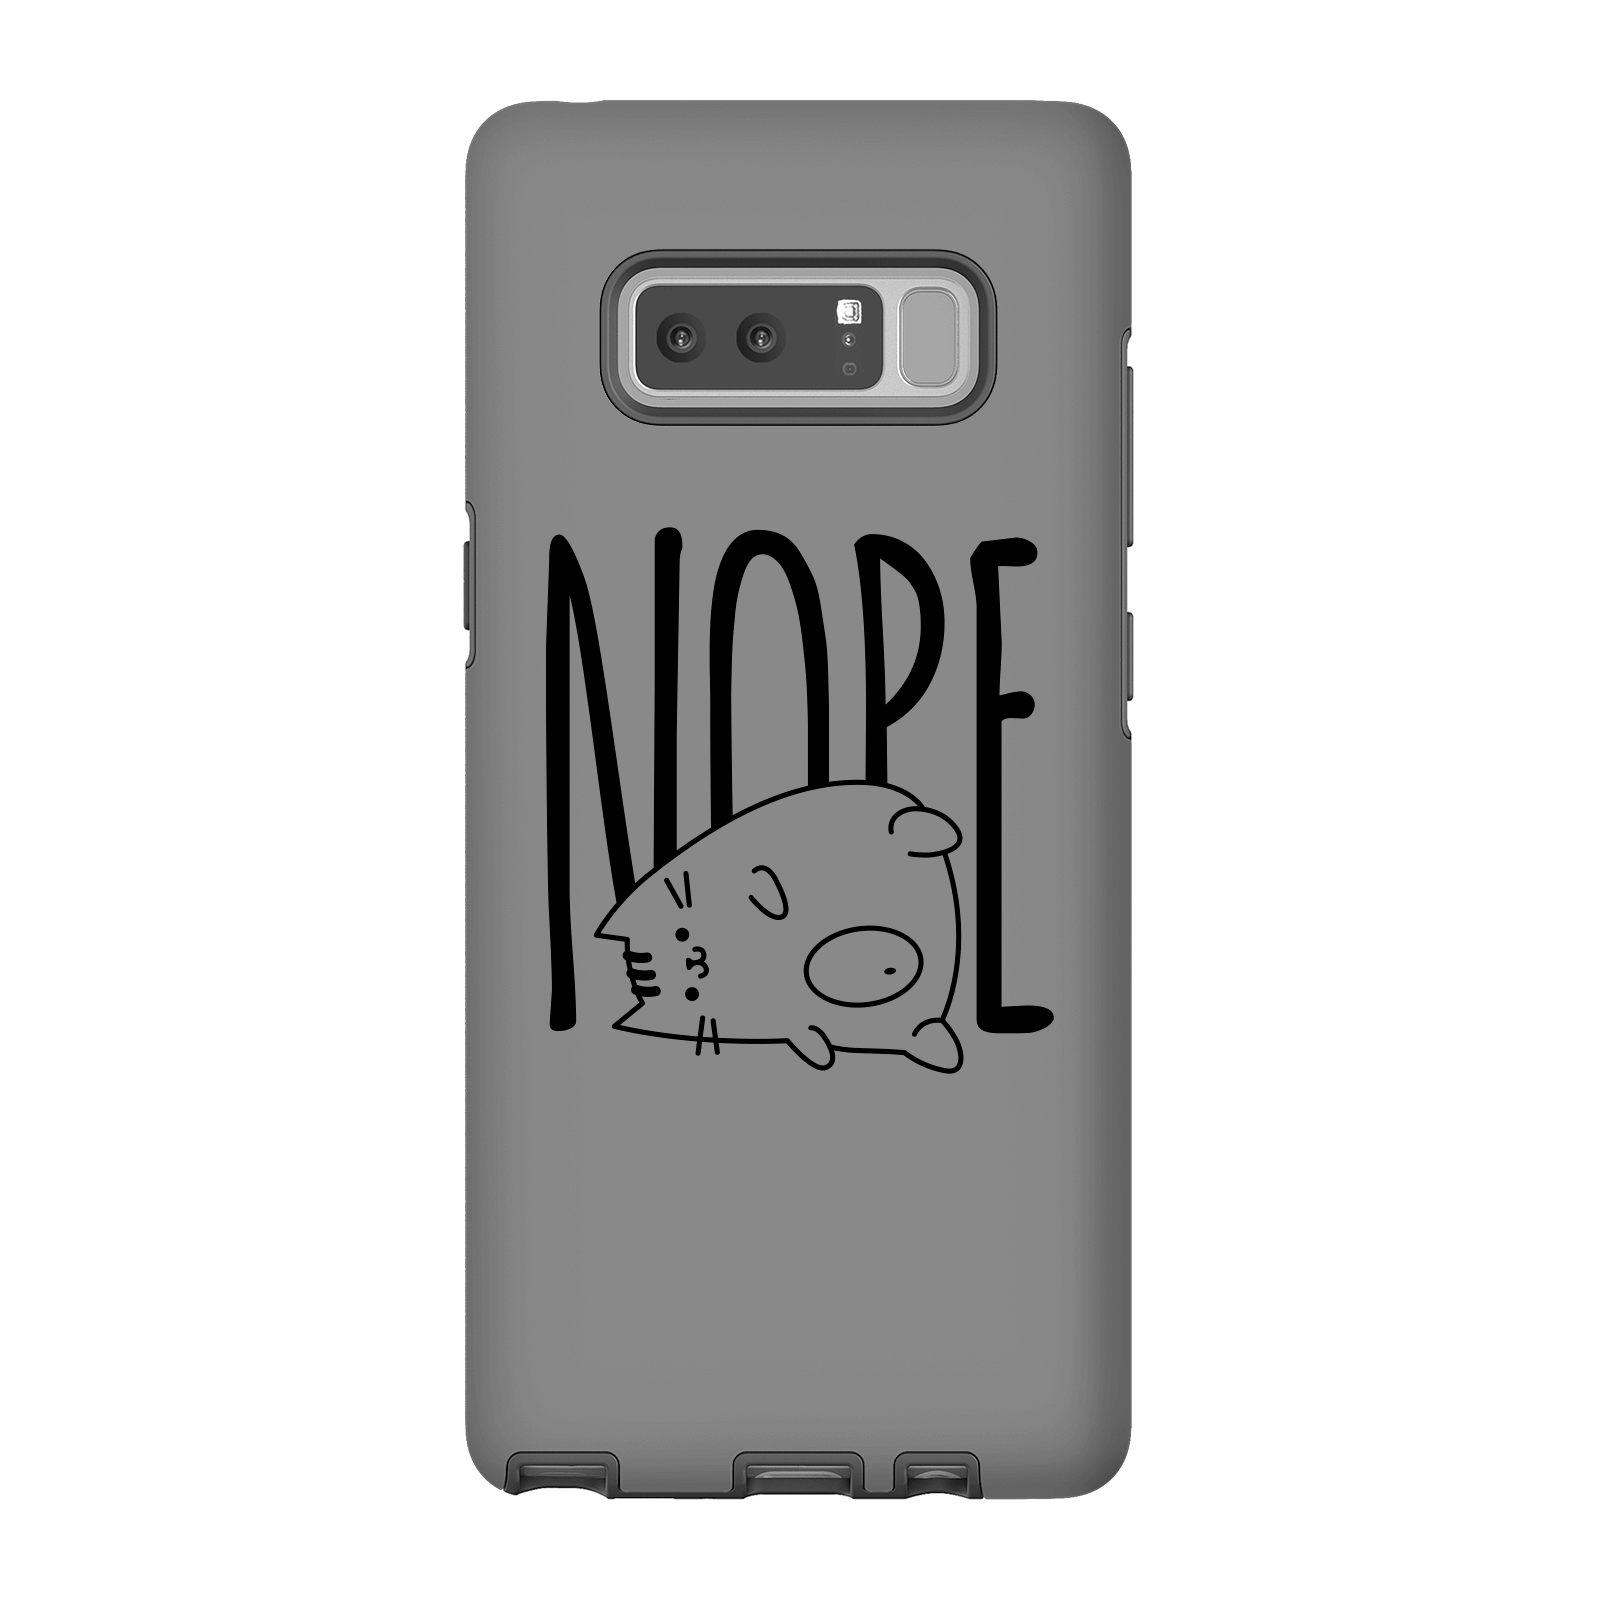 Nope Phone Case for iPhone and Android - Samsung Note 8 - Tough Case - Matte